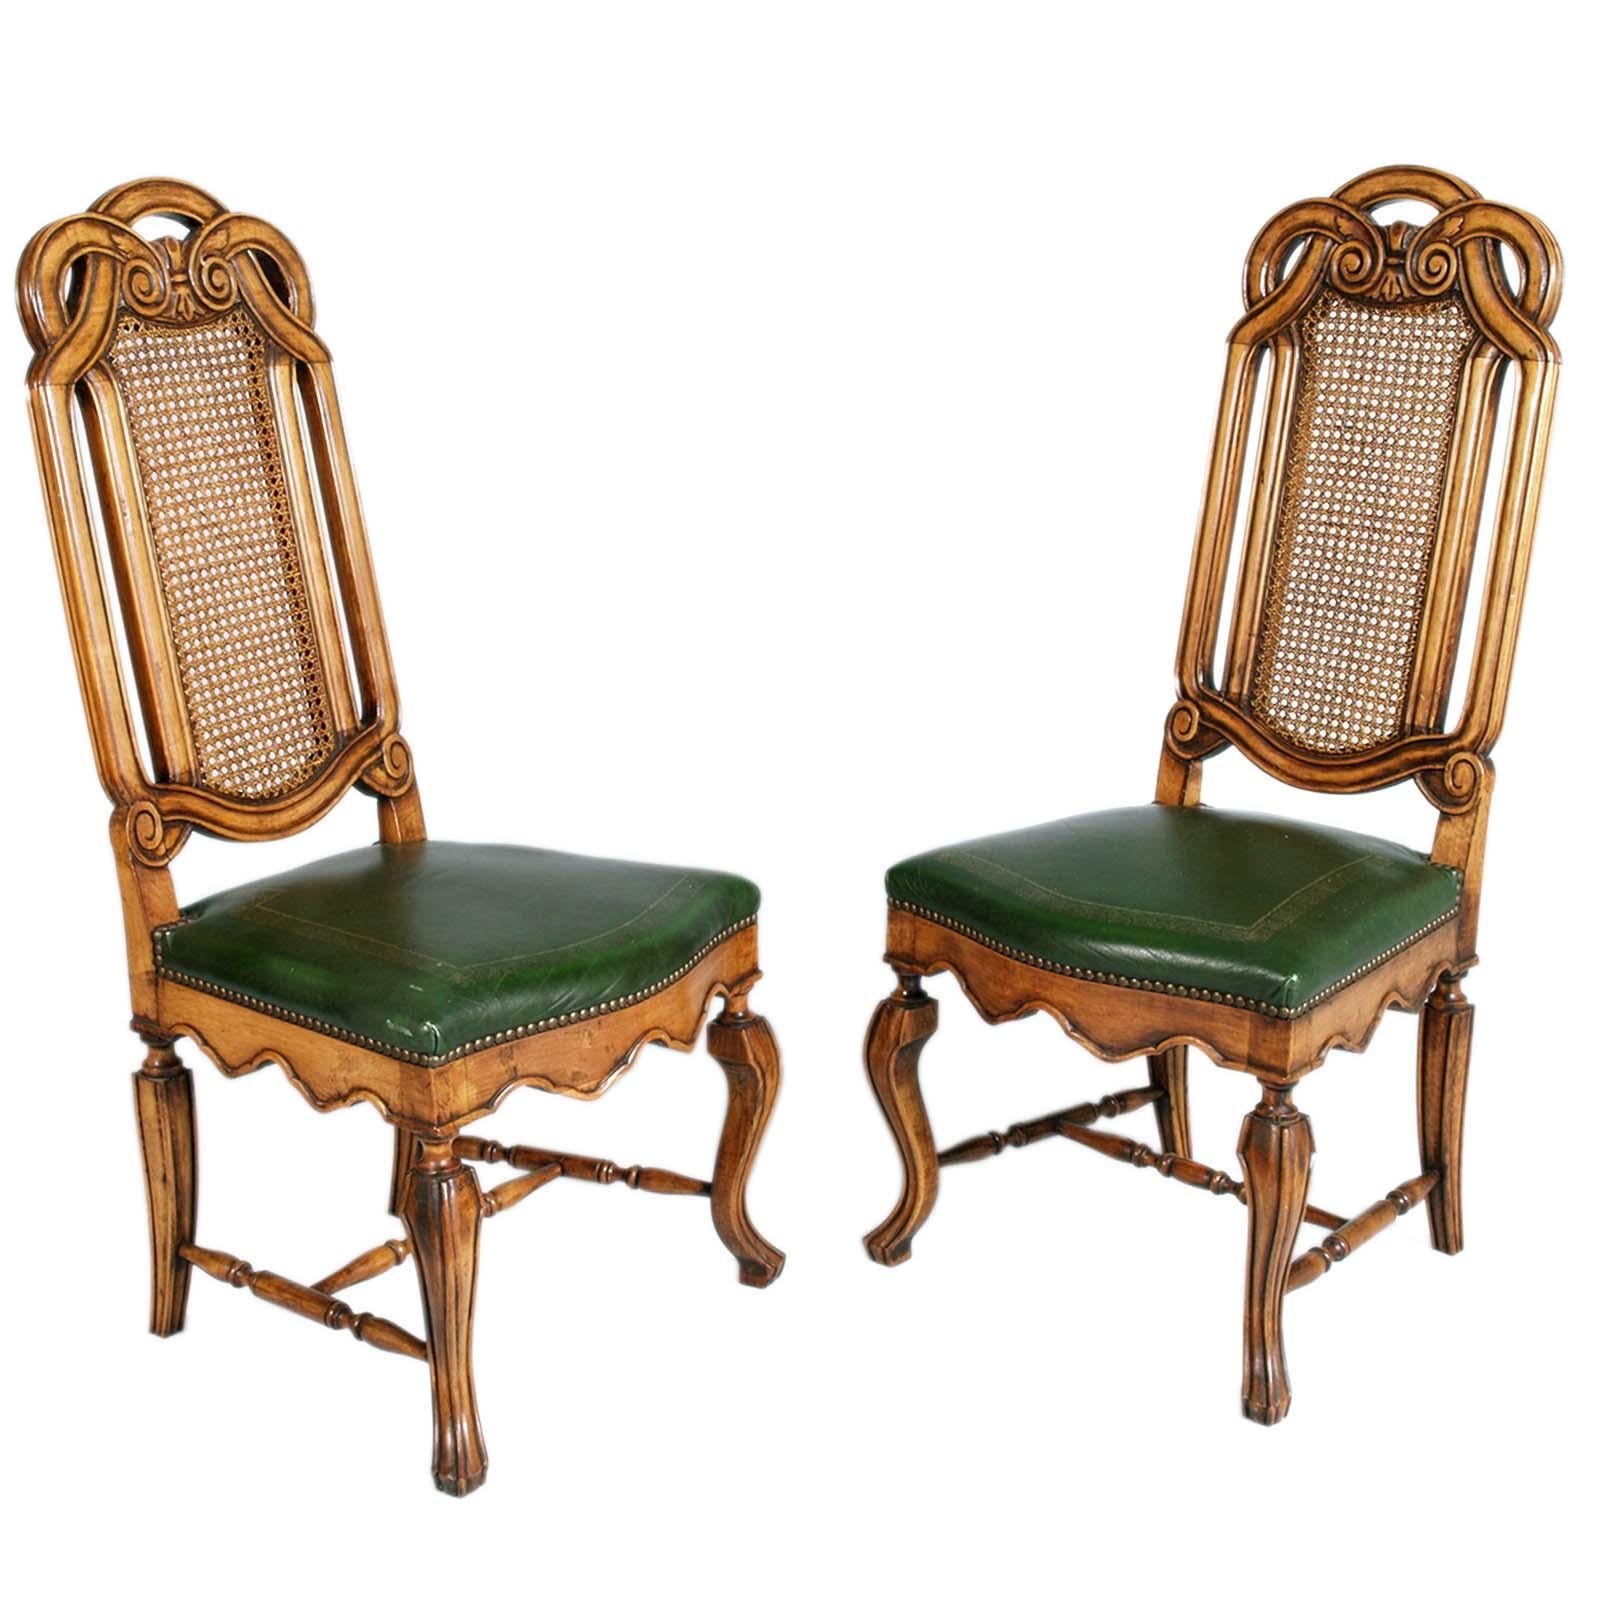 Eight sturdy Venetian Chippendale chairs, Palladian style, high back, in walnut entirely carved, Vienna straw, with green leather seat gold decorated edge. Majestic and modern at the same time, suitable for any setting.
From Cantù, wax polished